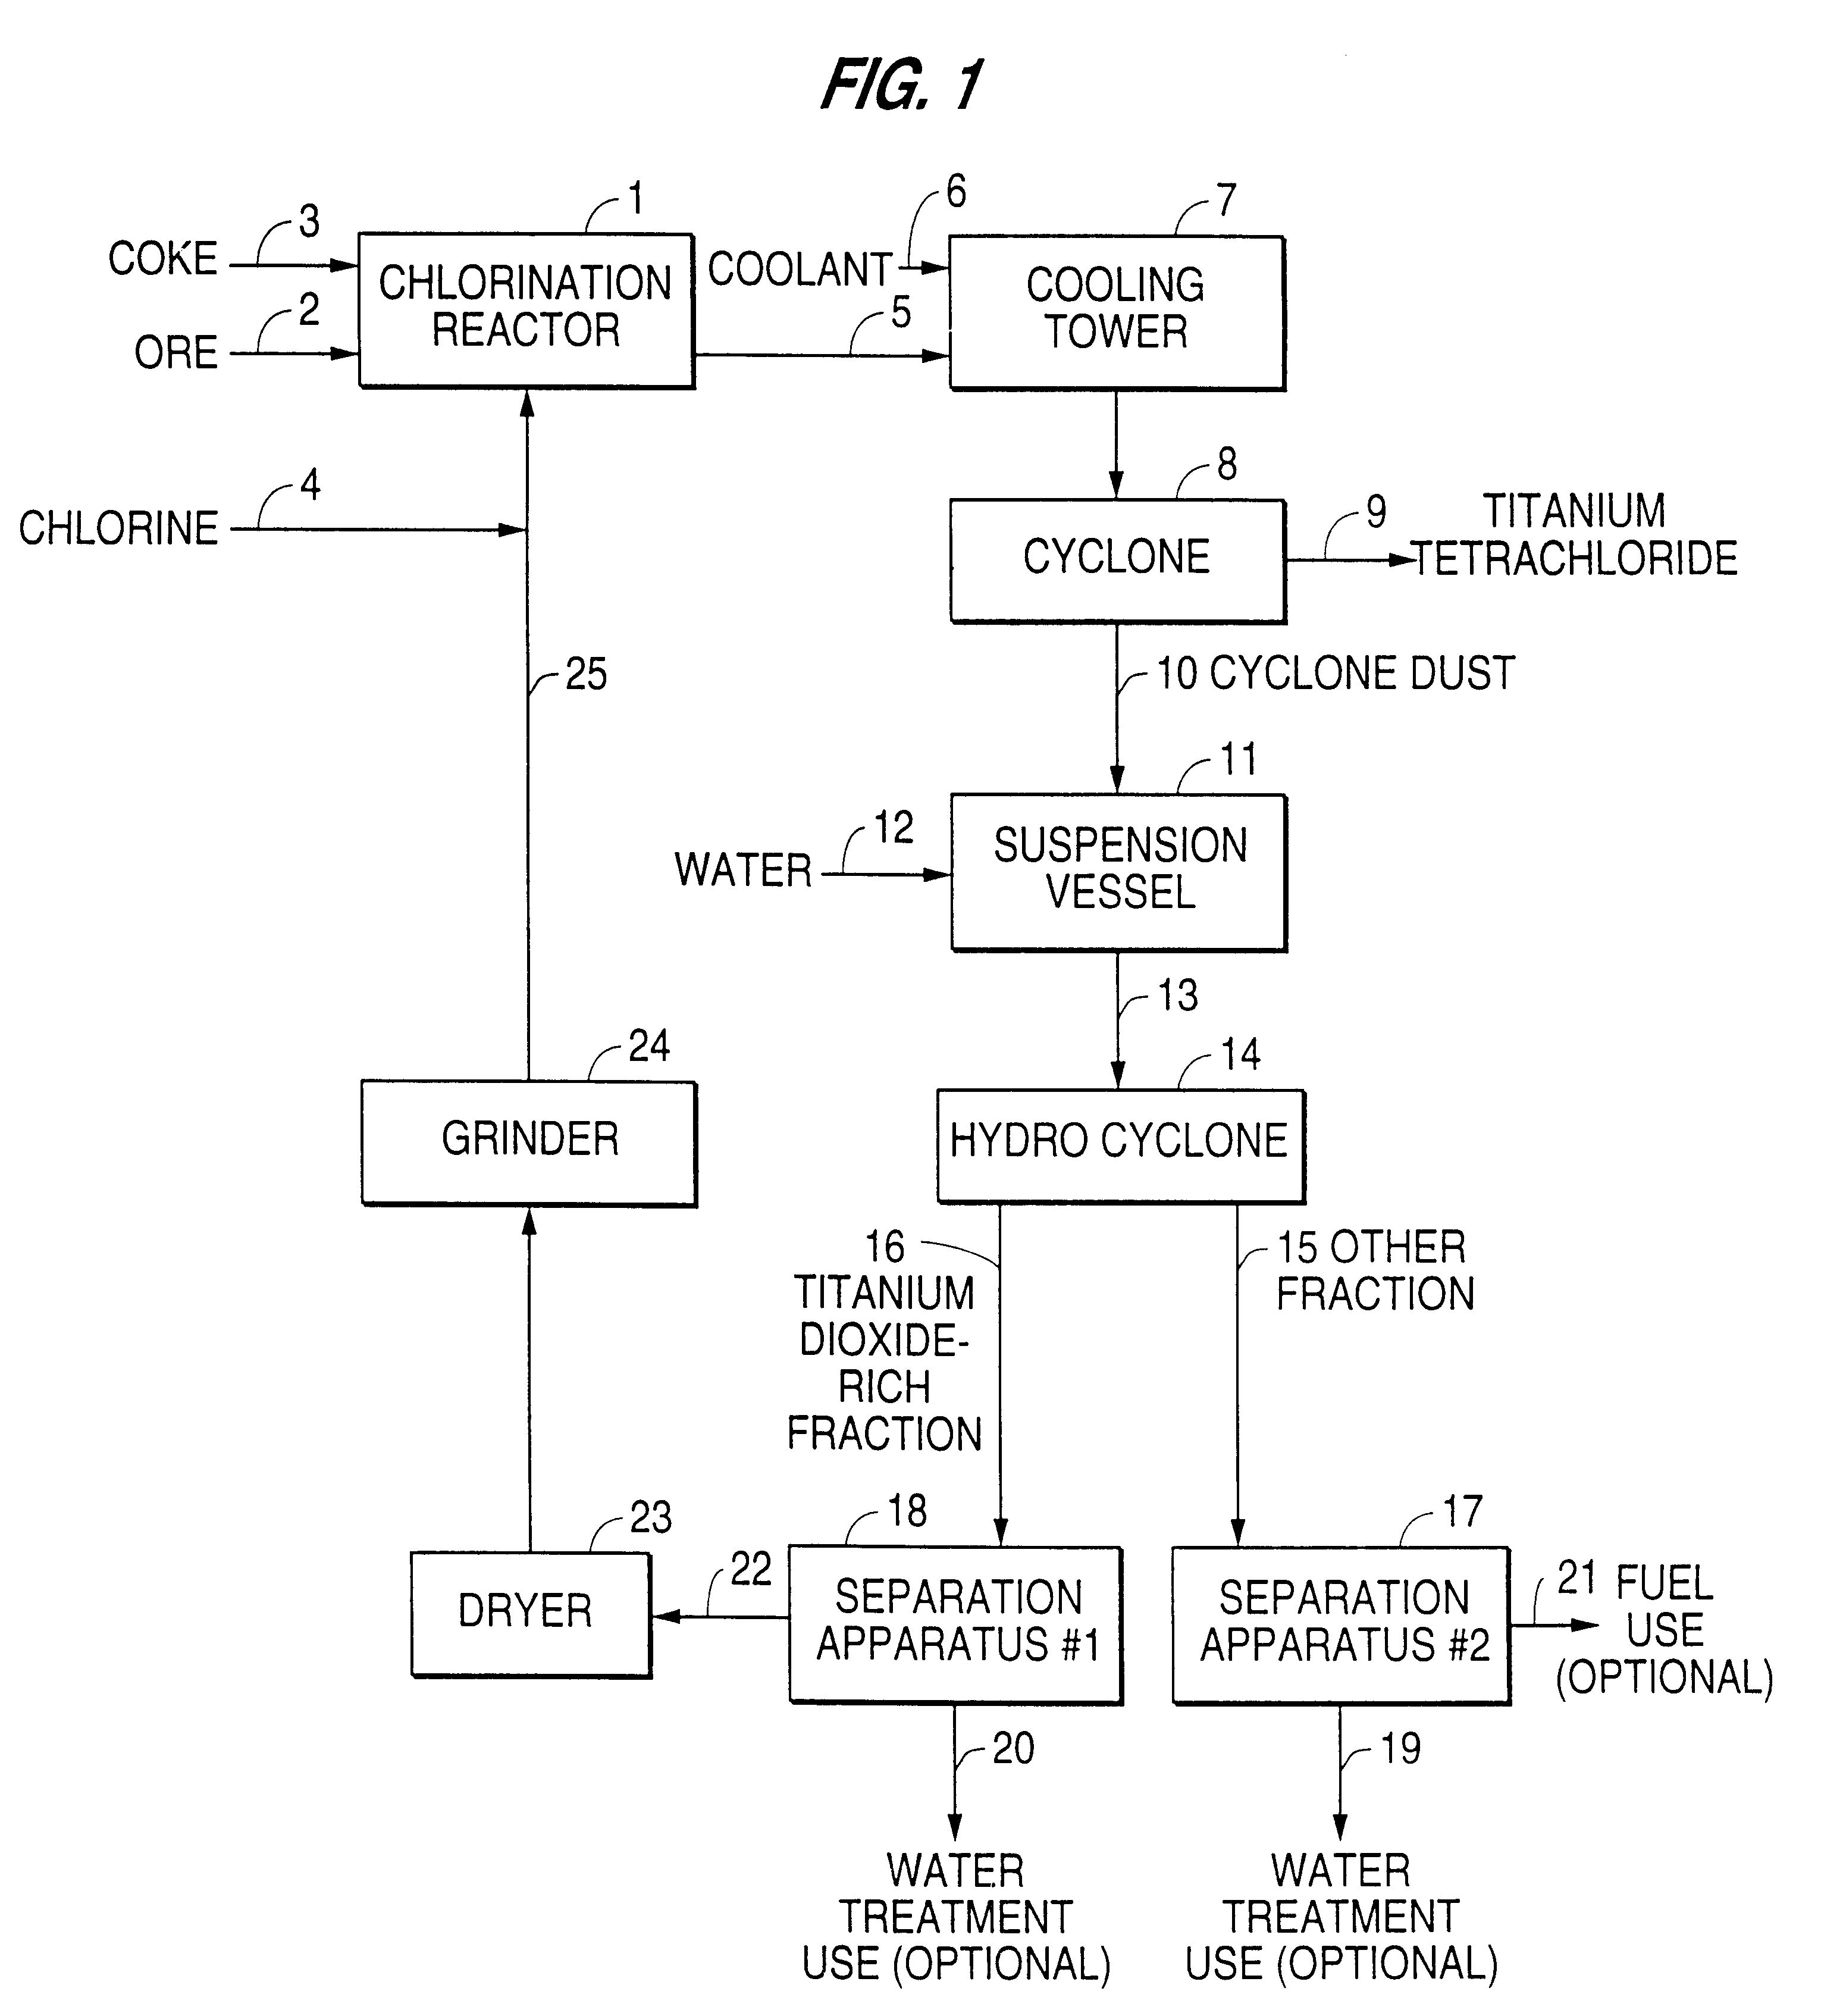 Process for increasing the yield in the manufacture of titanium dioxide by the chloride process